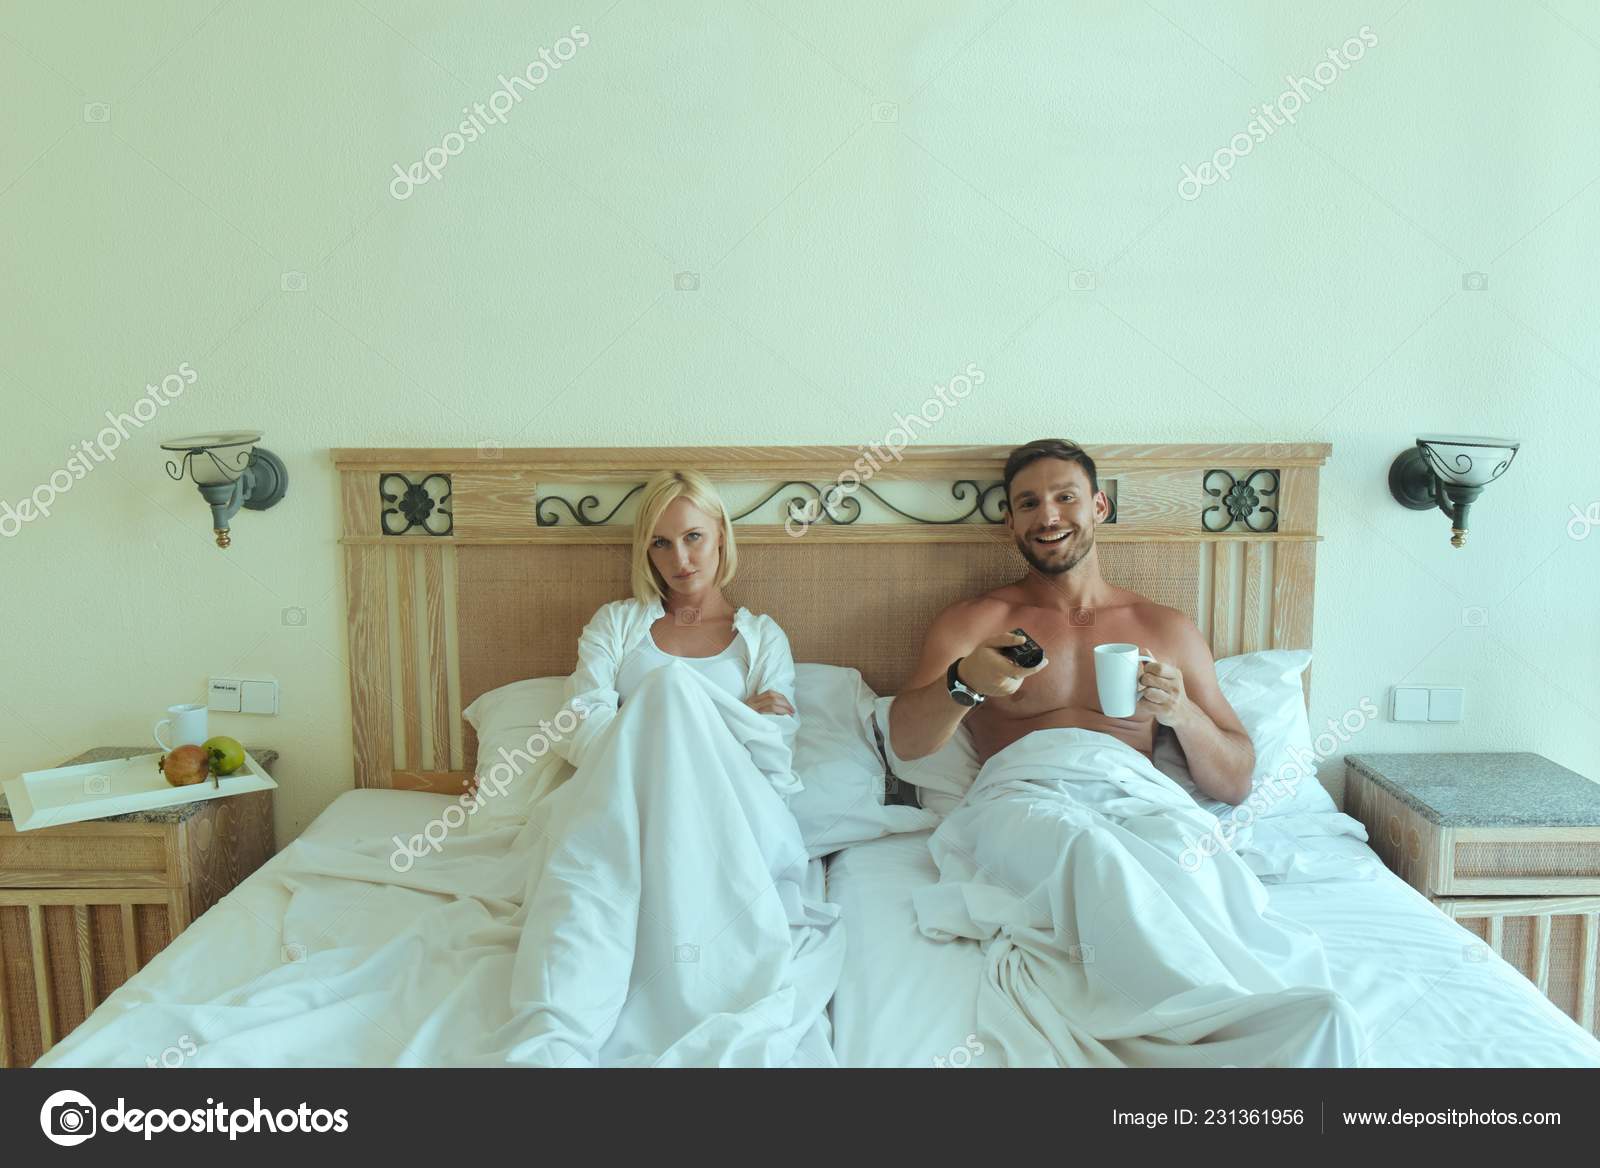 Handsome Man Beautiful Blonde Lying Bed Together Having Lack Communication Stock Photo by ©SuperStock2018 231361956 picture